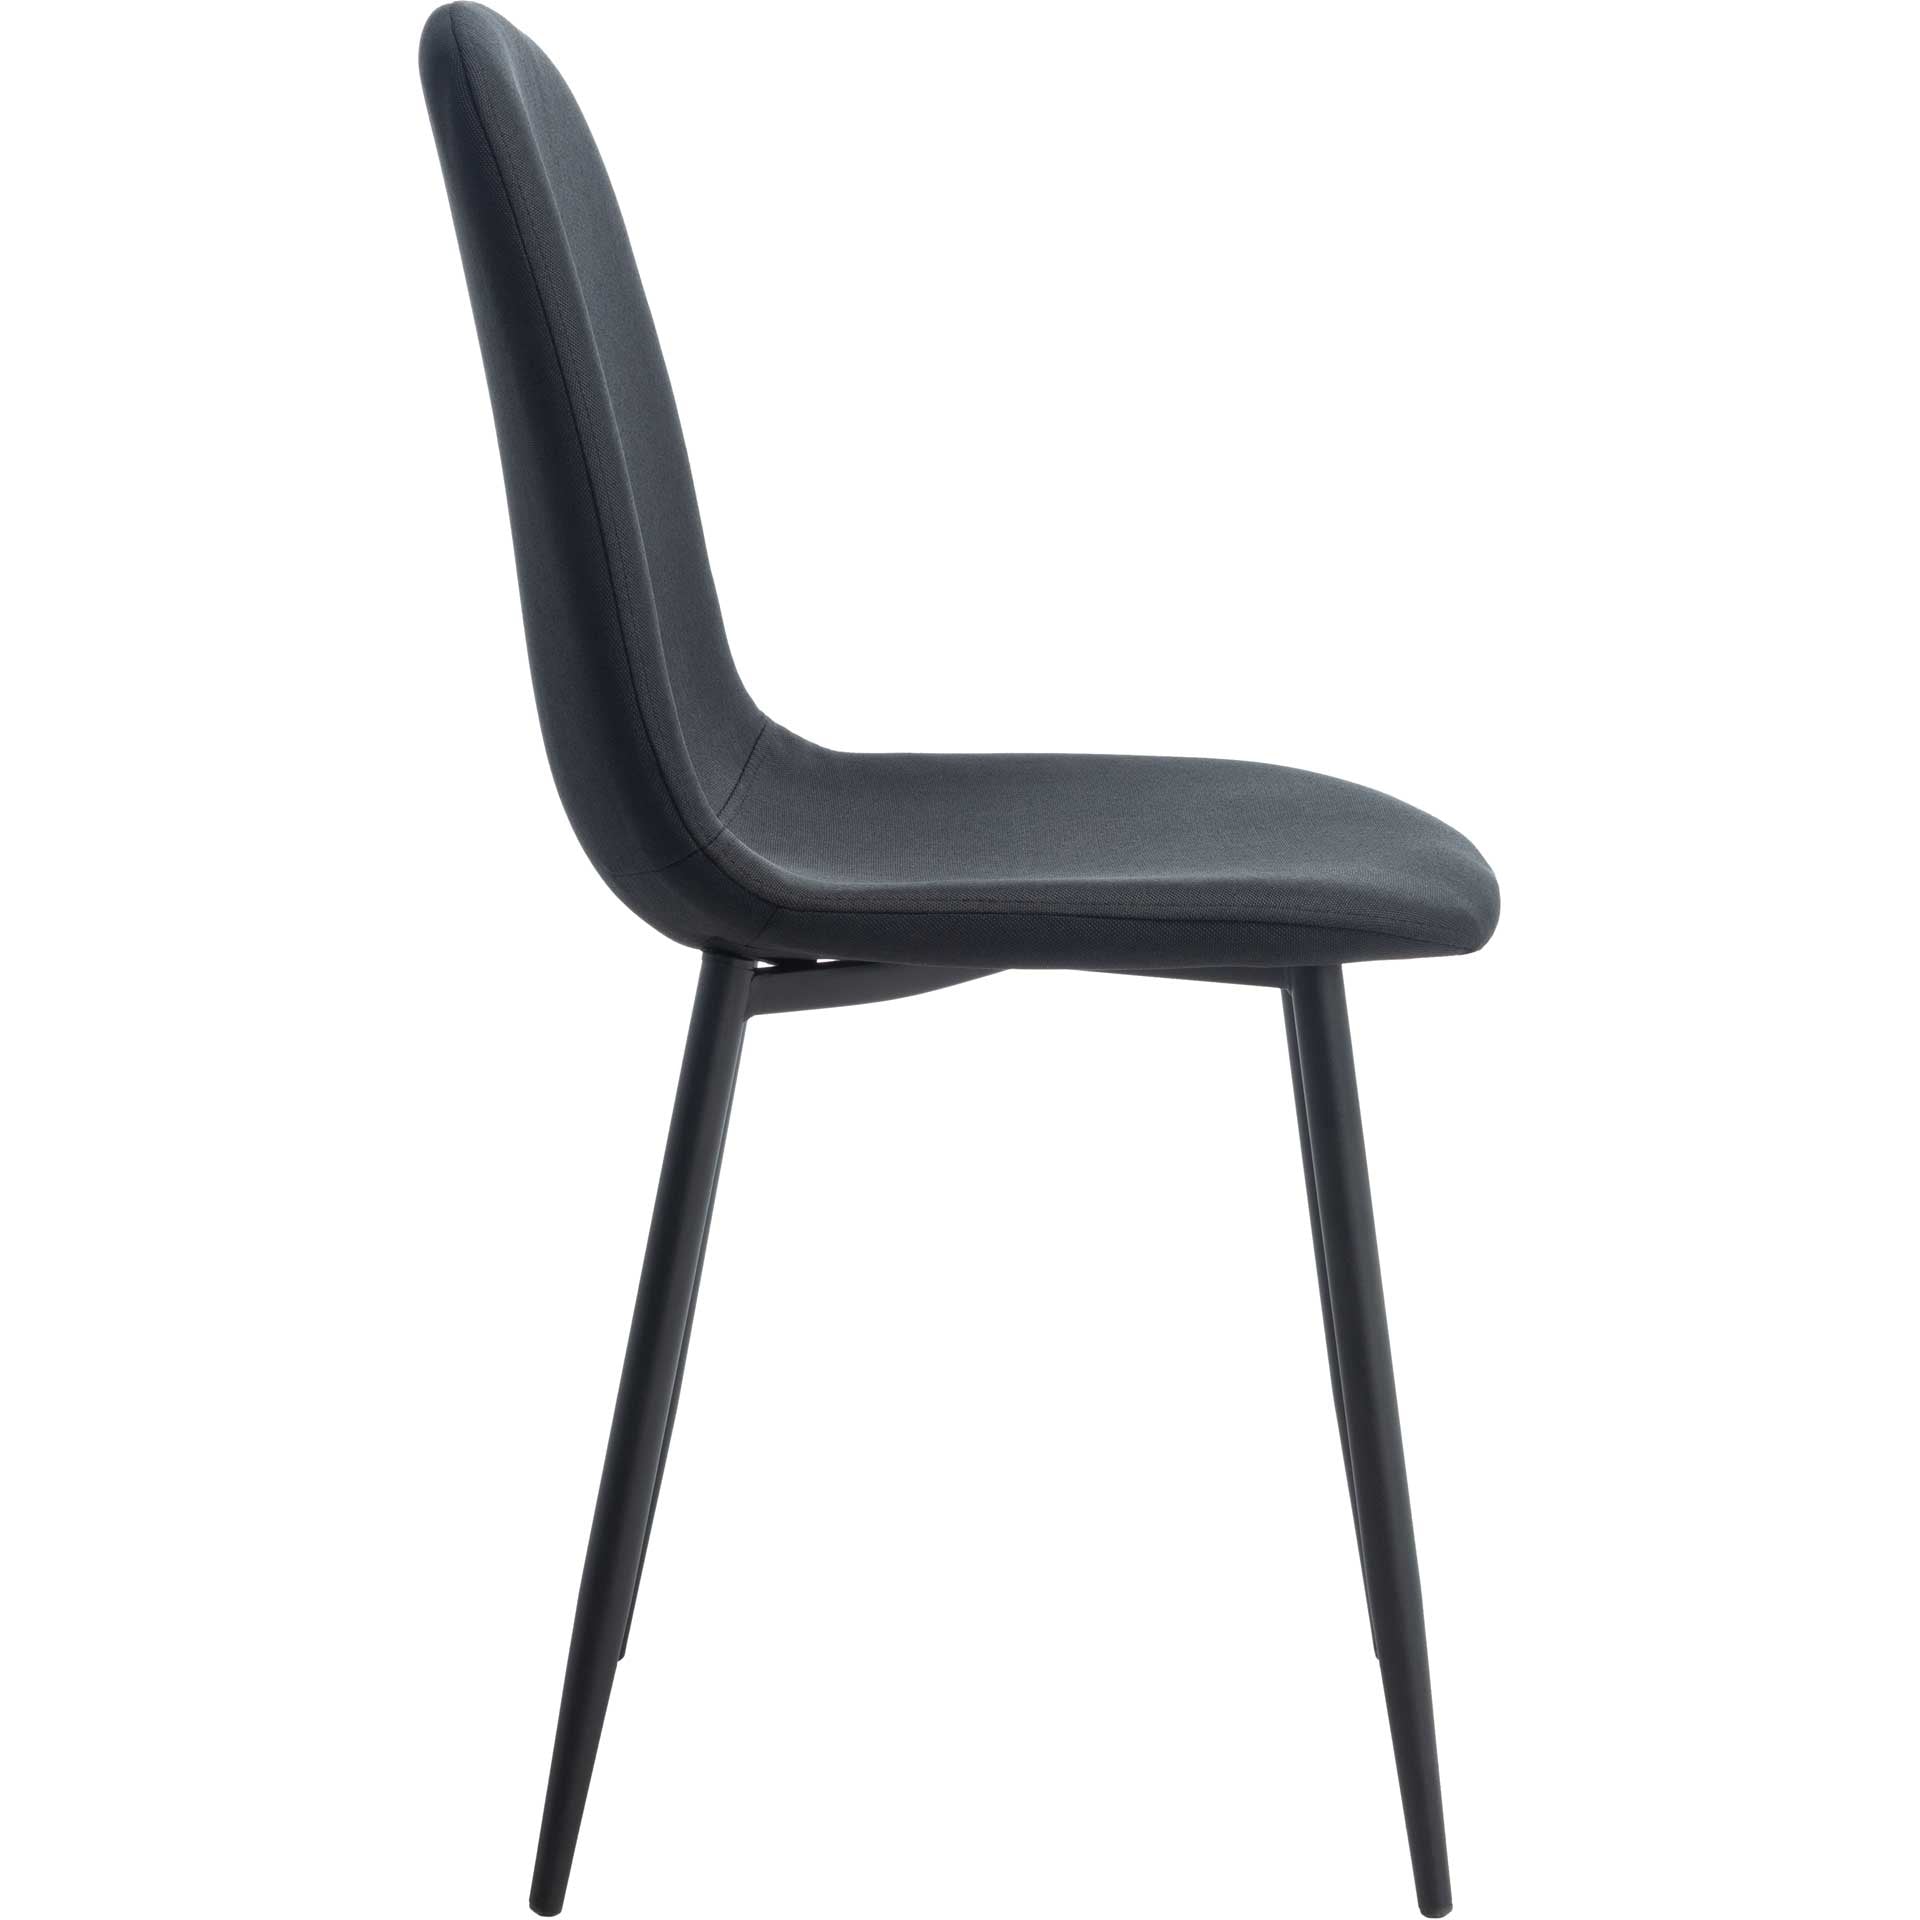 Blaize Dining Chair Black (Set of 2)